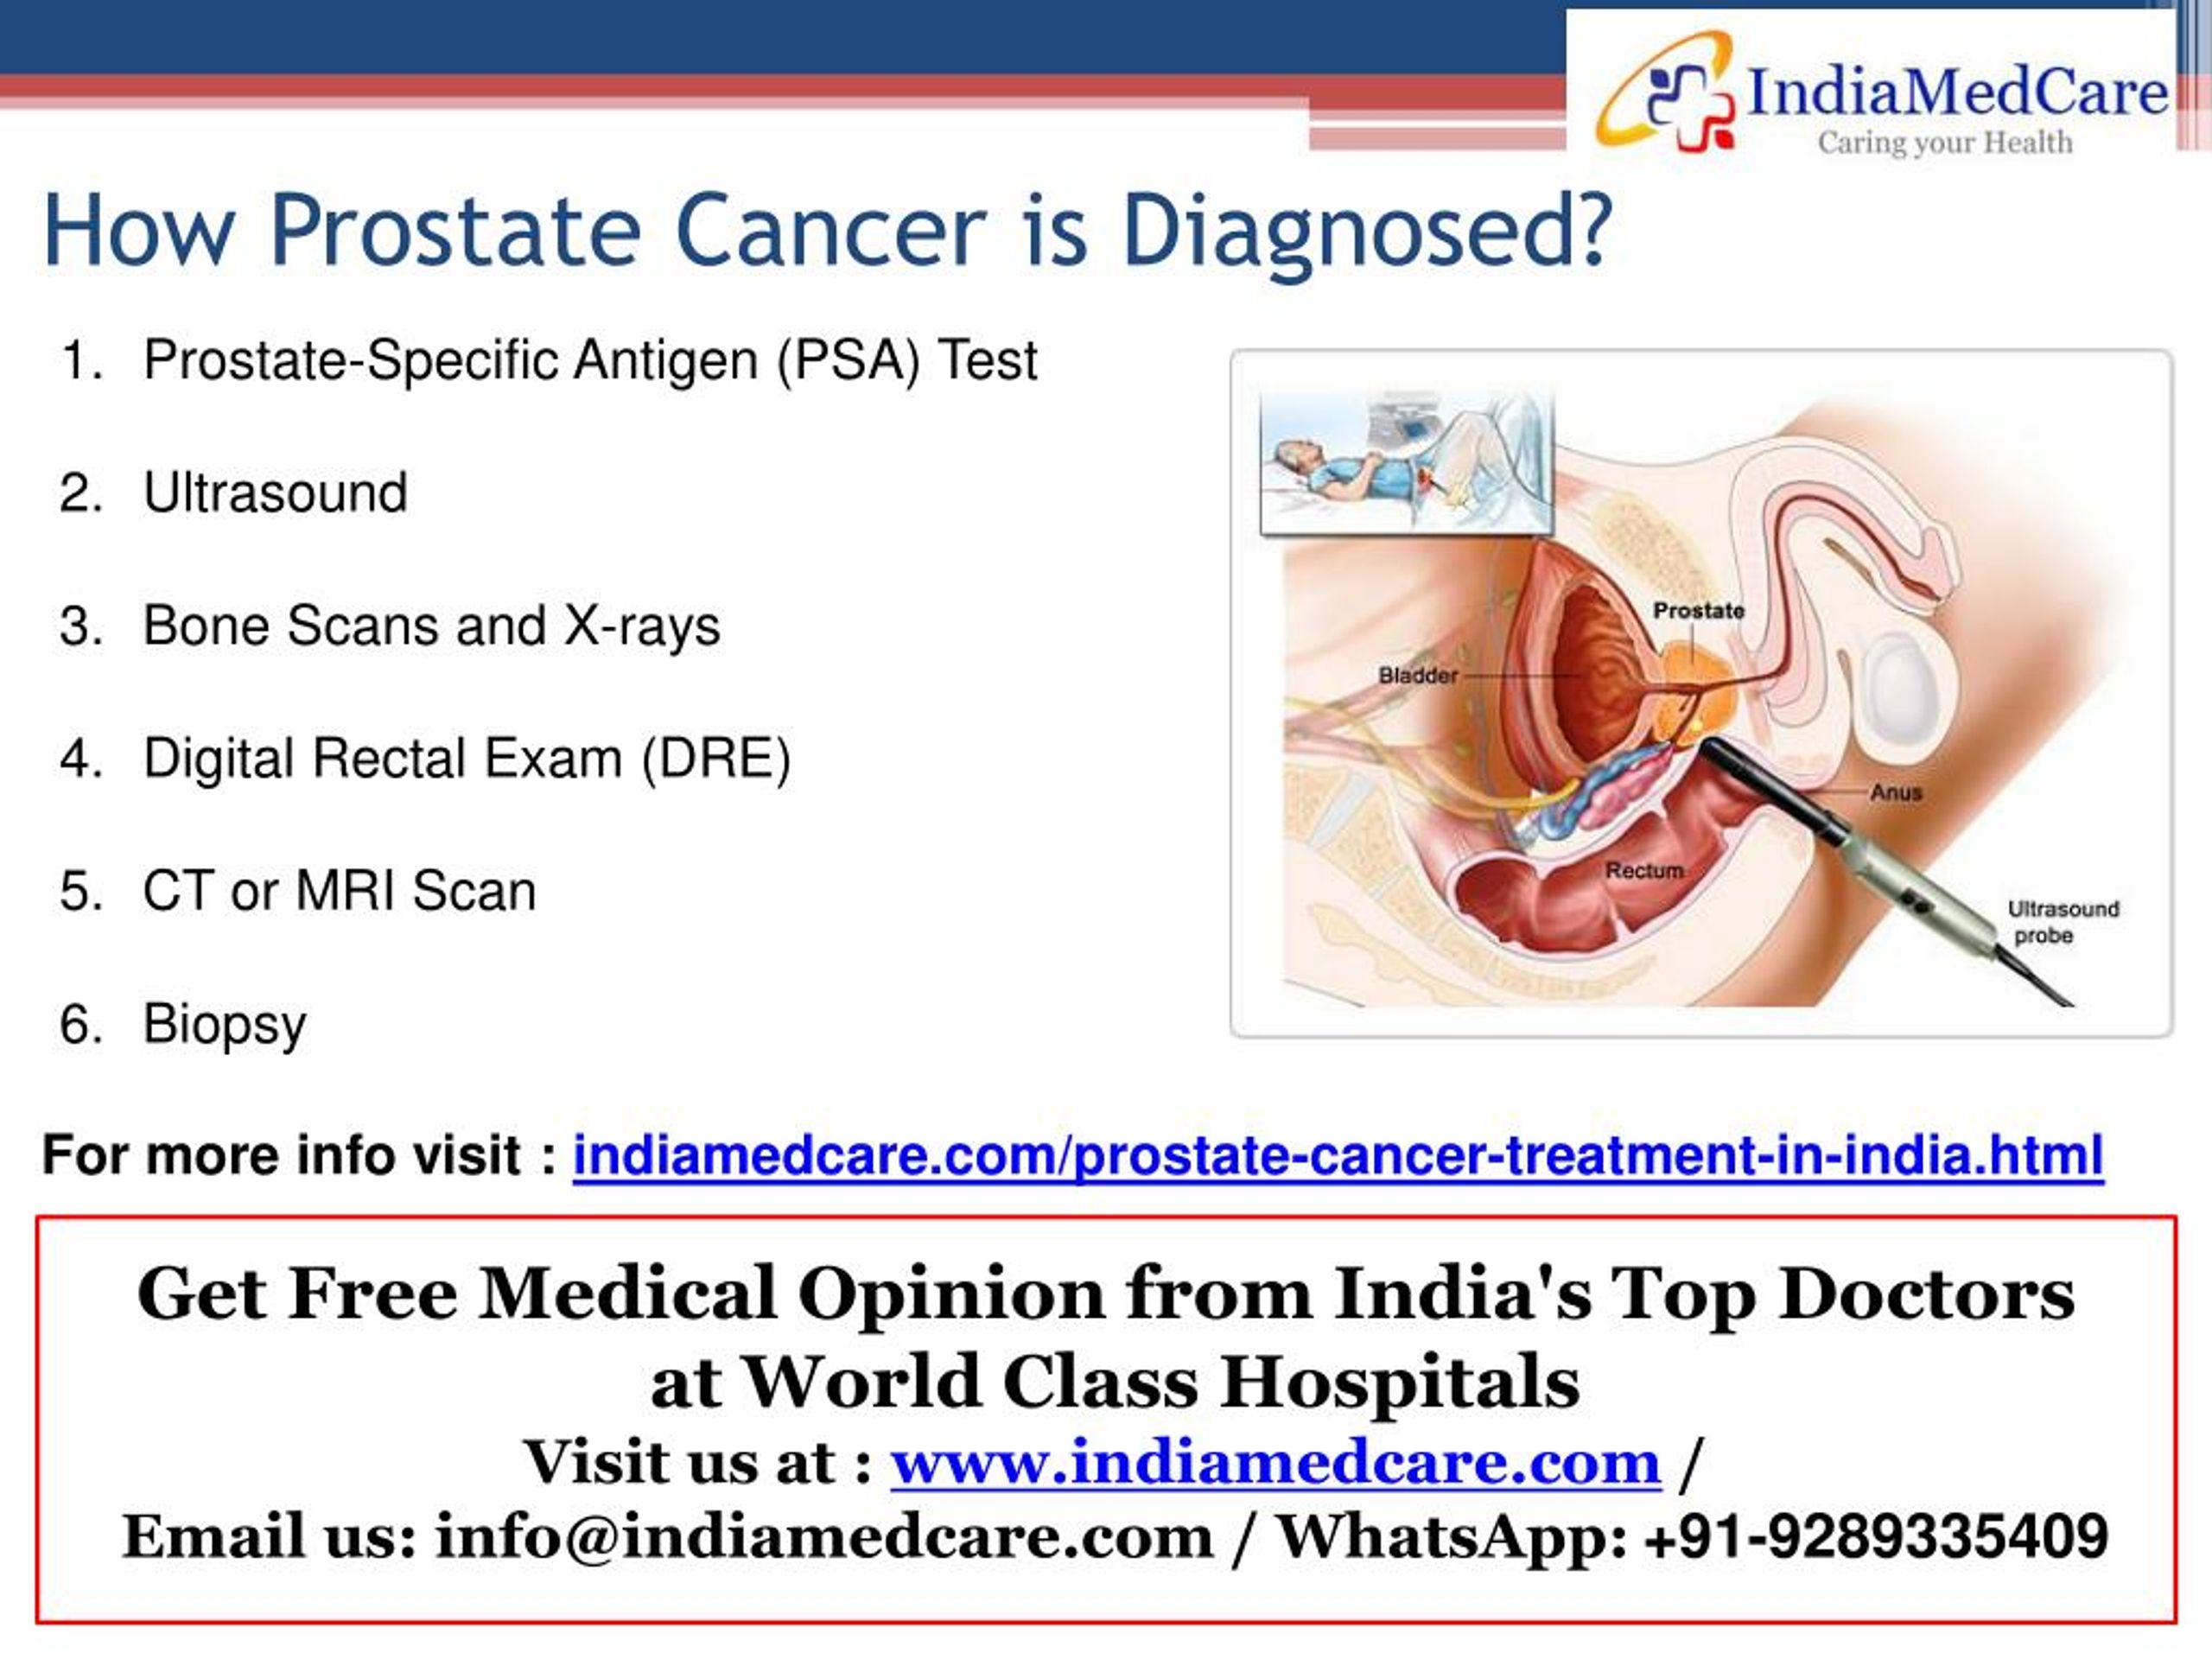 How curable is prostate cancer